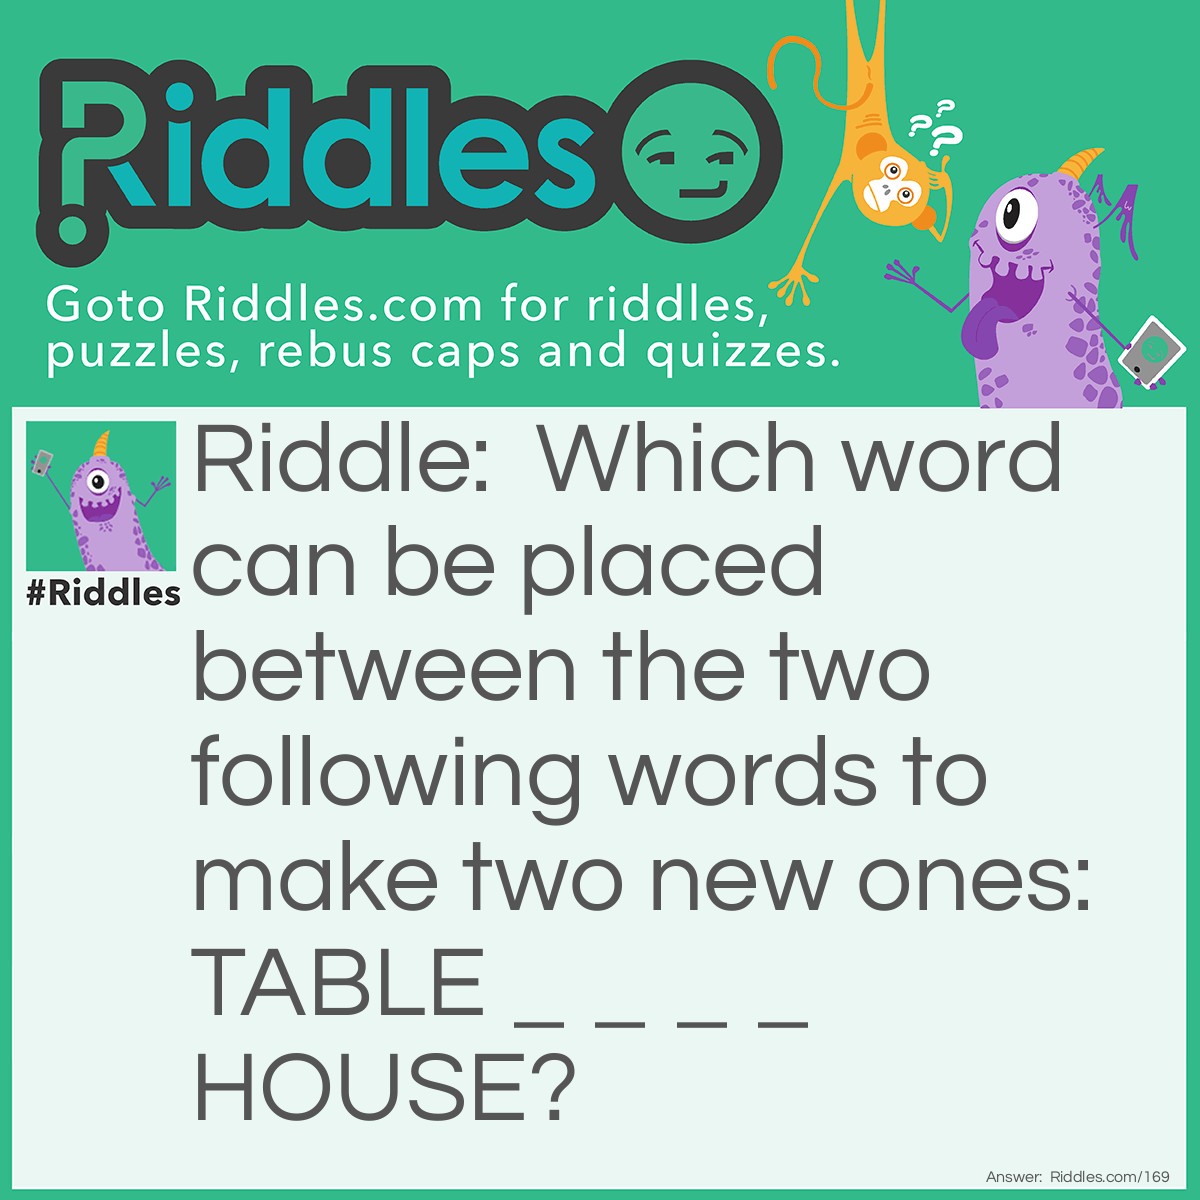 Riddle: Which word can be placed between the two following words to make two new ones: TABLE _ _ _ _ HOUSE? Answer: WARE.